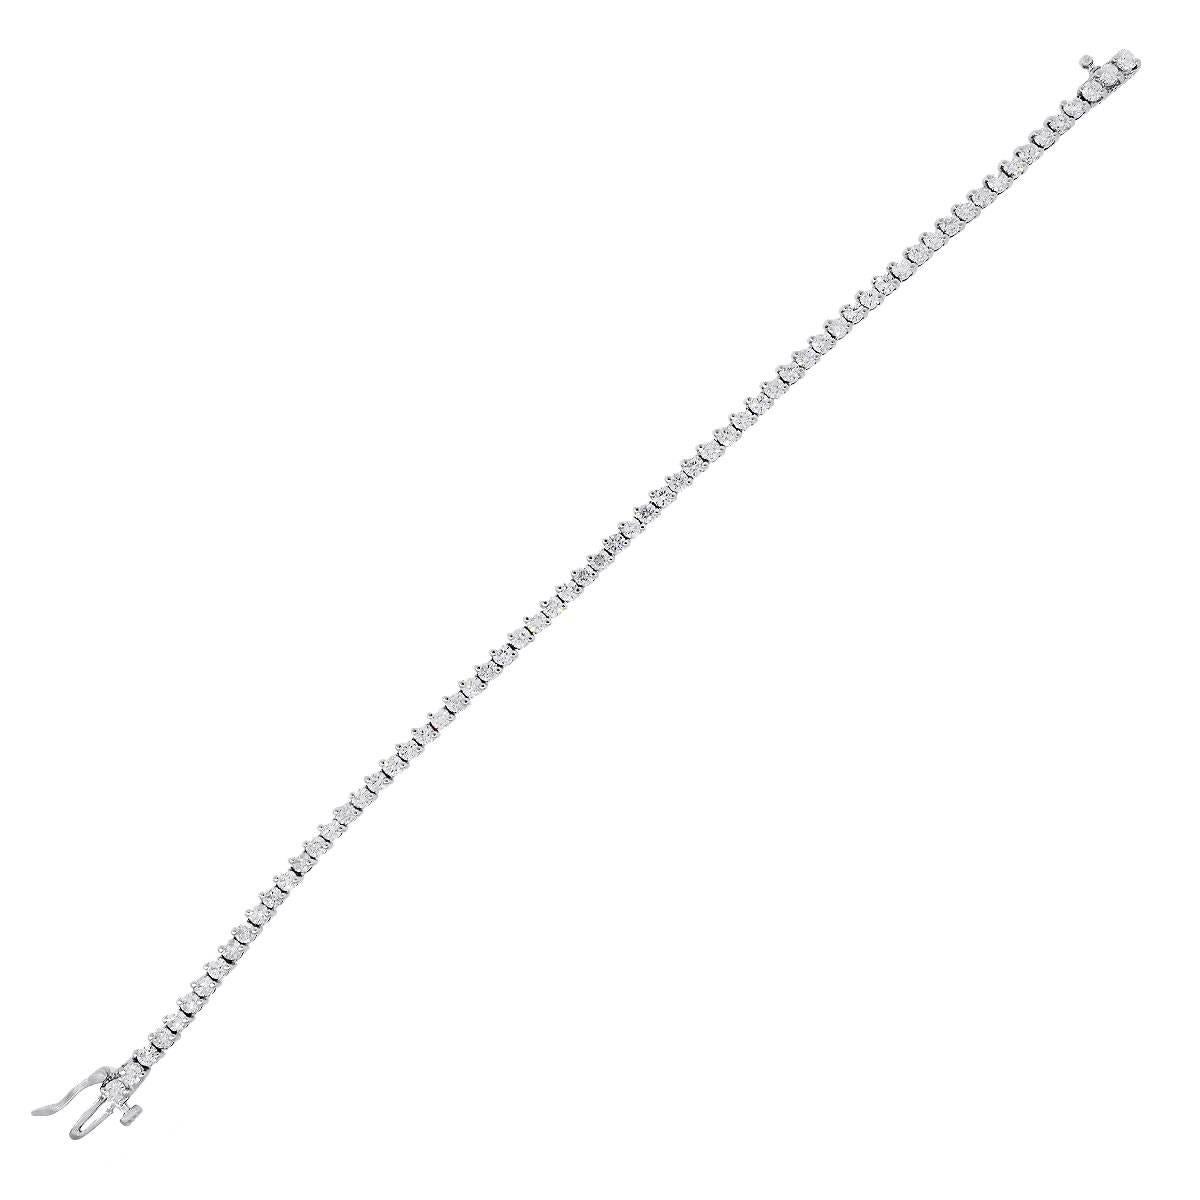 Material: 14k white gold
Diamond Details: Approximately 3.5ctw round brilliant diamonds. Diamonds are G/H in color and SI in clarity.
Clasp: Tongue in box clasp
Measurements: 7″
Total Weight: 9.9g (6.3dwt)
SKU: G7197